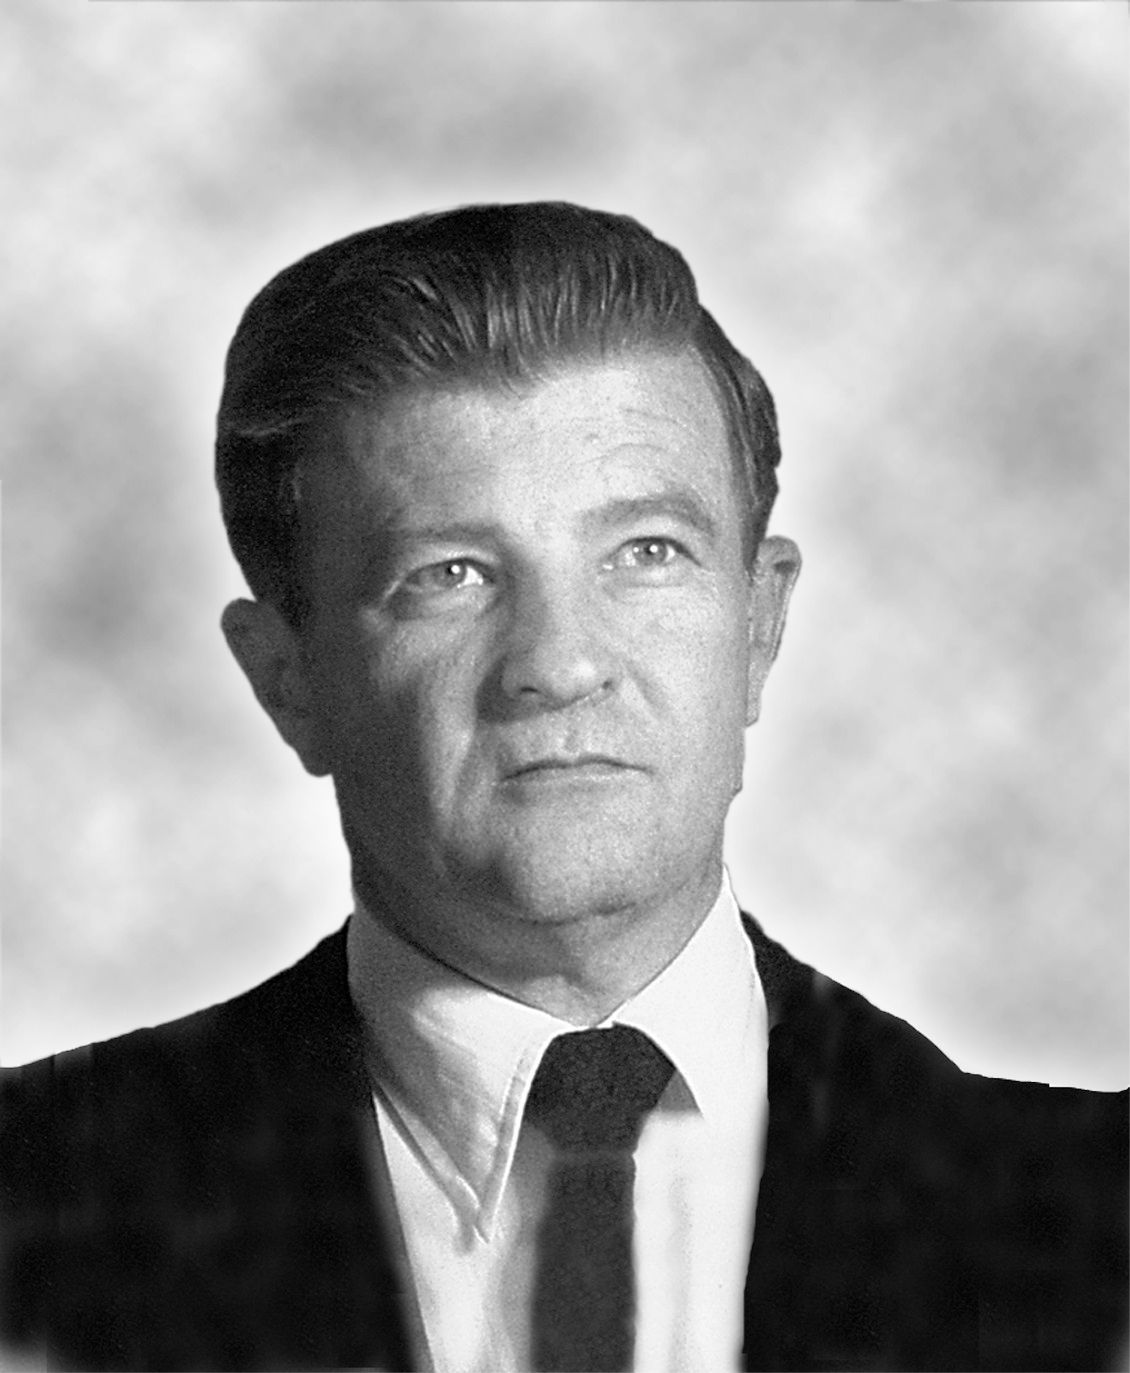 A black and white photo of a man in a suit and tie